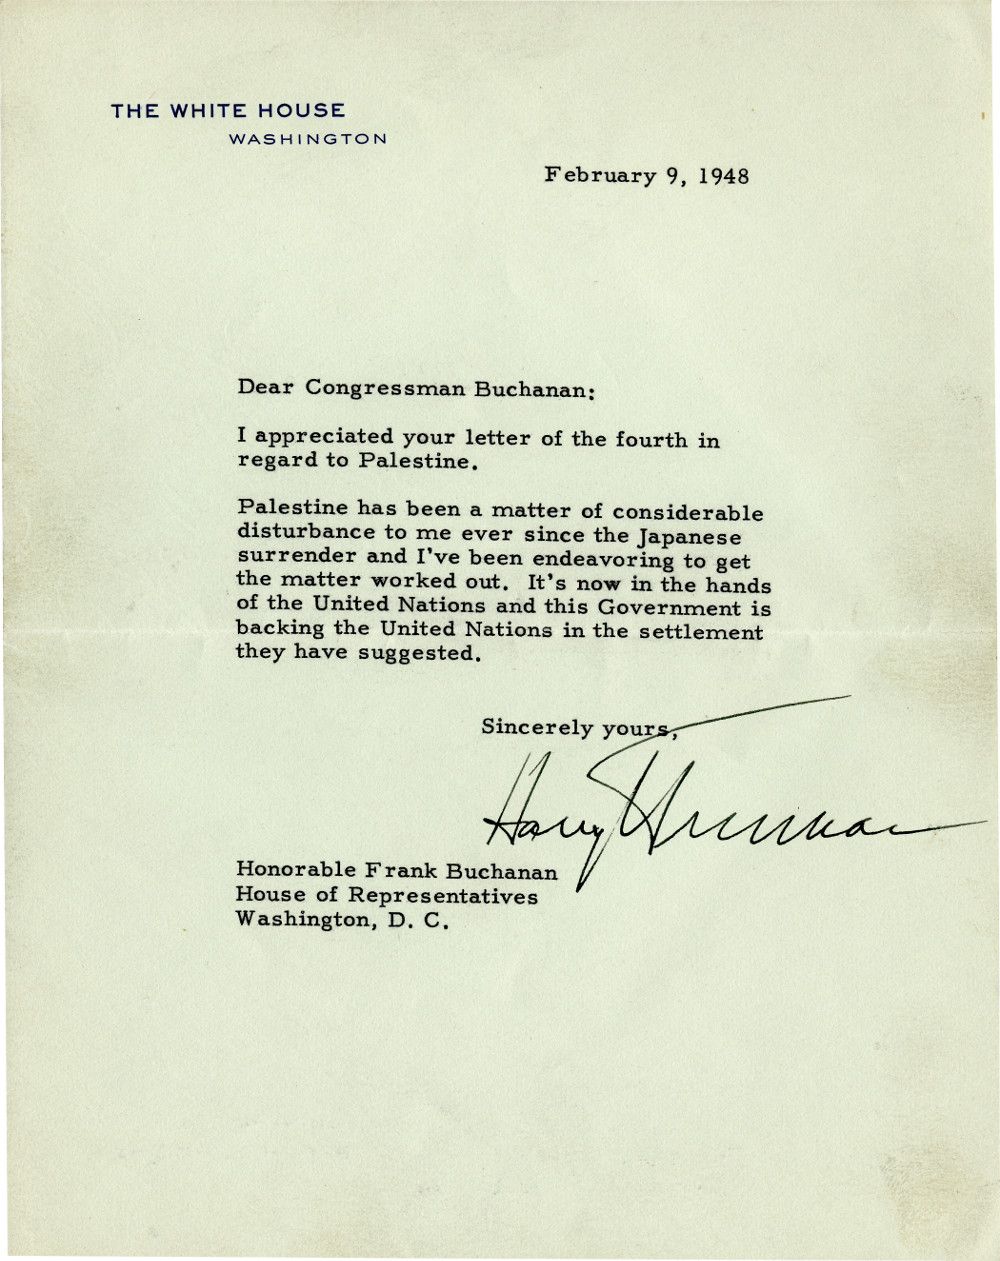 Palestine, Truman Says, is a “Matter of Considerable Disturbance” to be Determined by U.N.